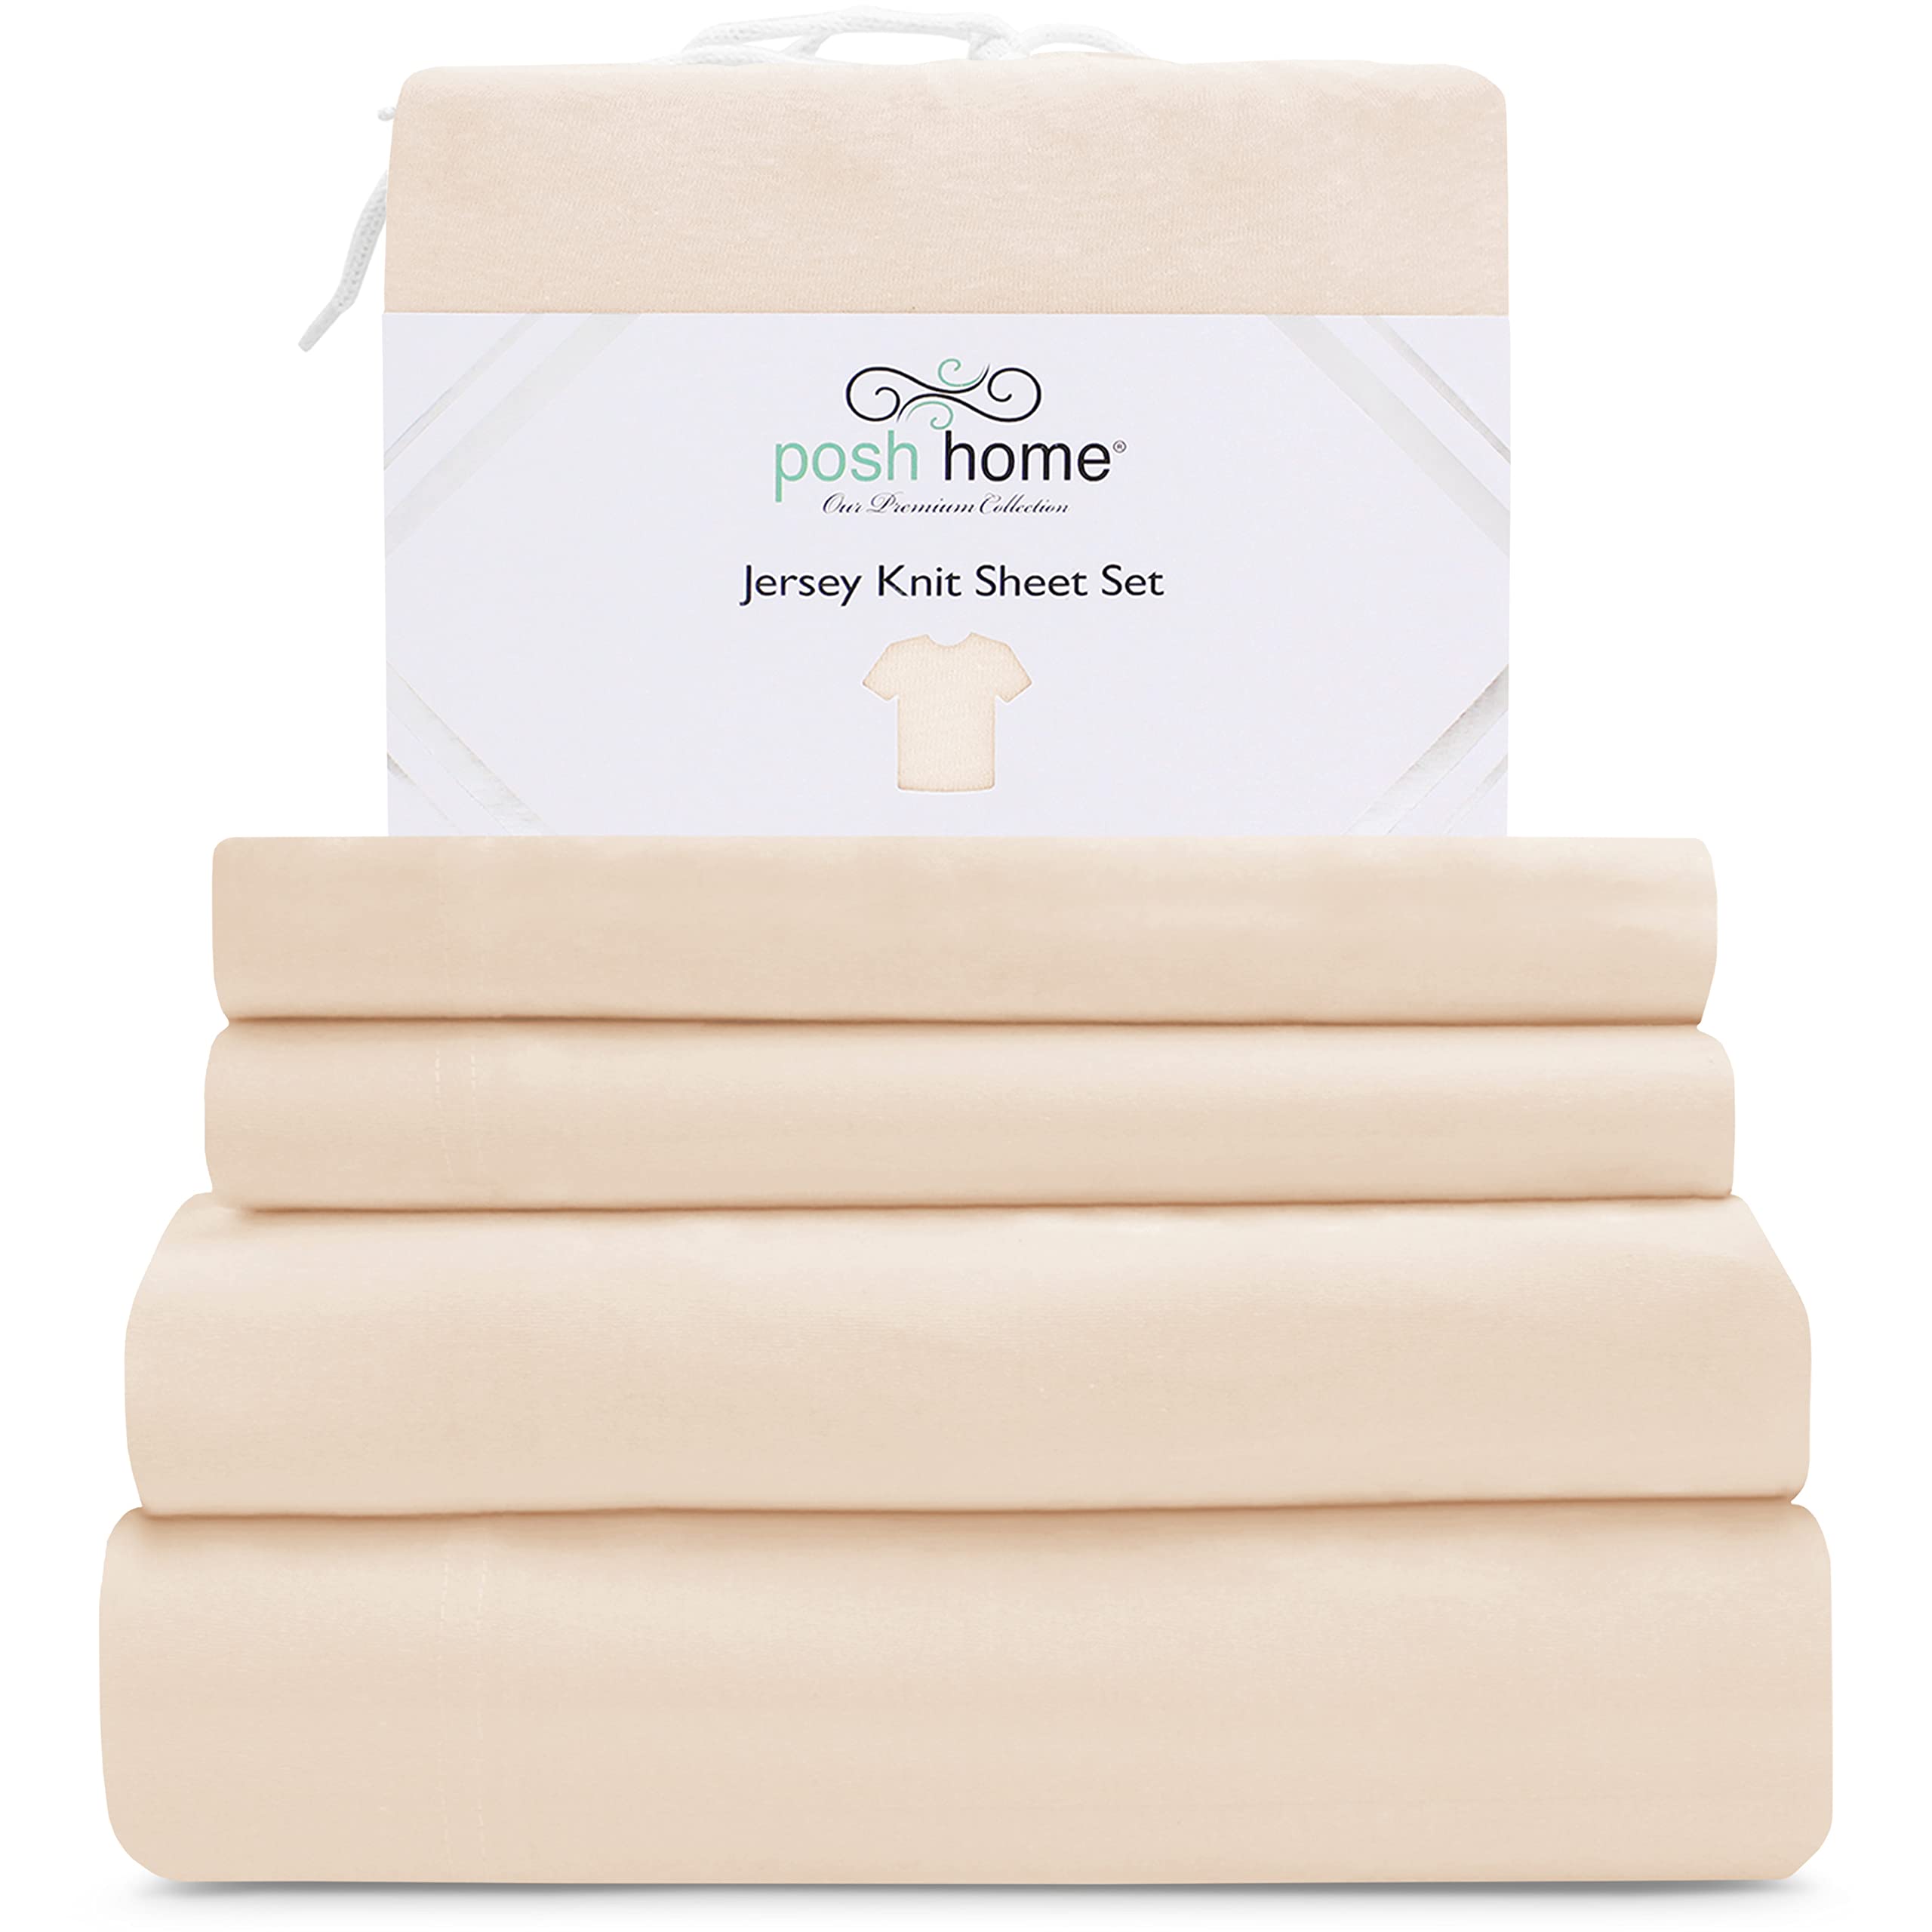 Posh Home Jersey Knit Sheet Set - 3-Piece Jersey Bed Sheets - T-Shirt Breathable & Soft cotton Jersey Sheets - Includes Flat She